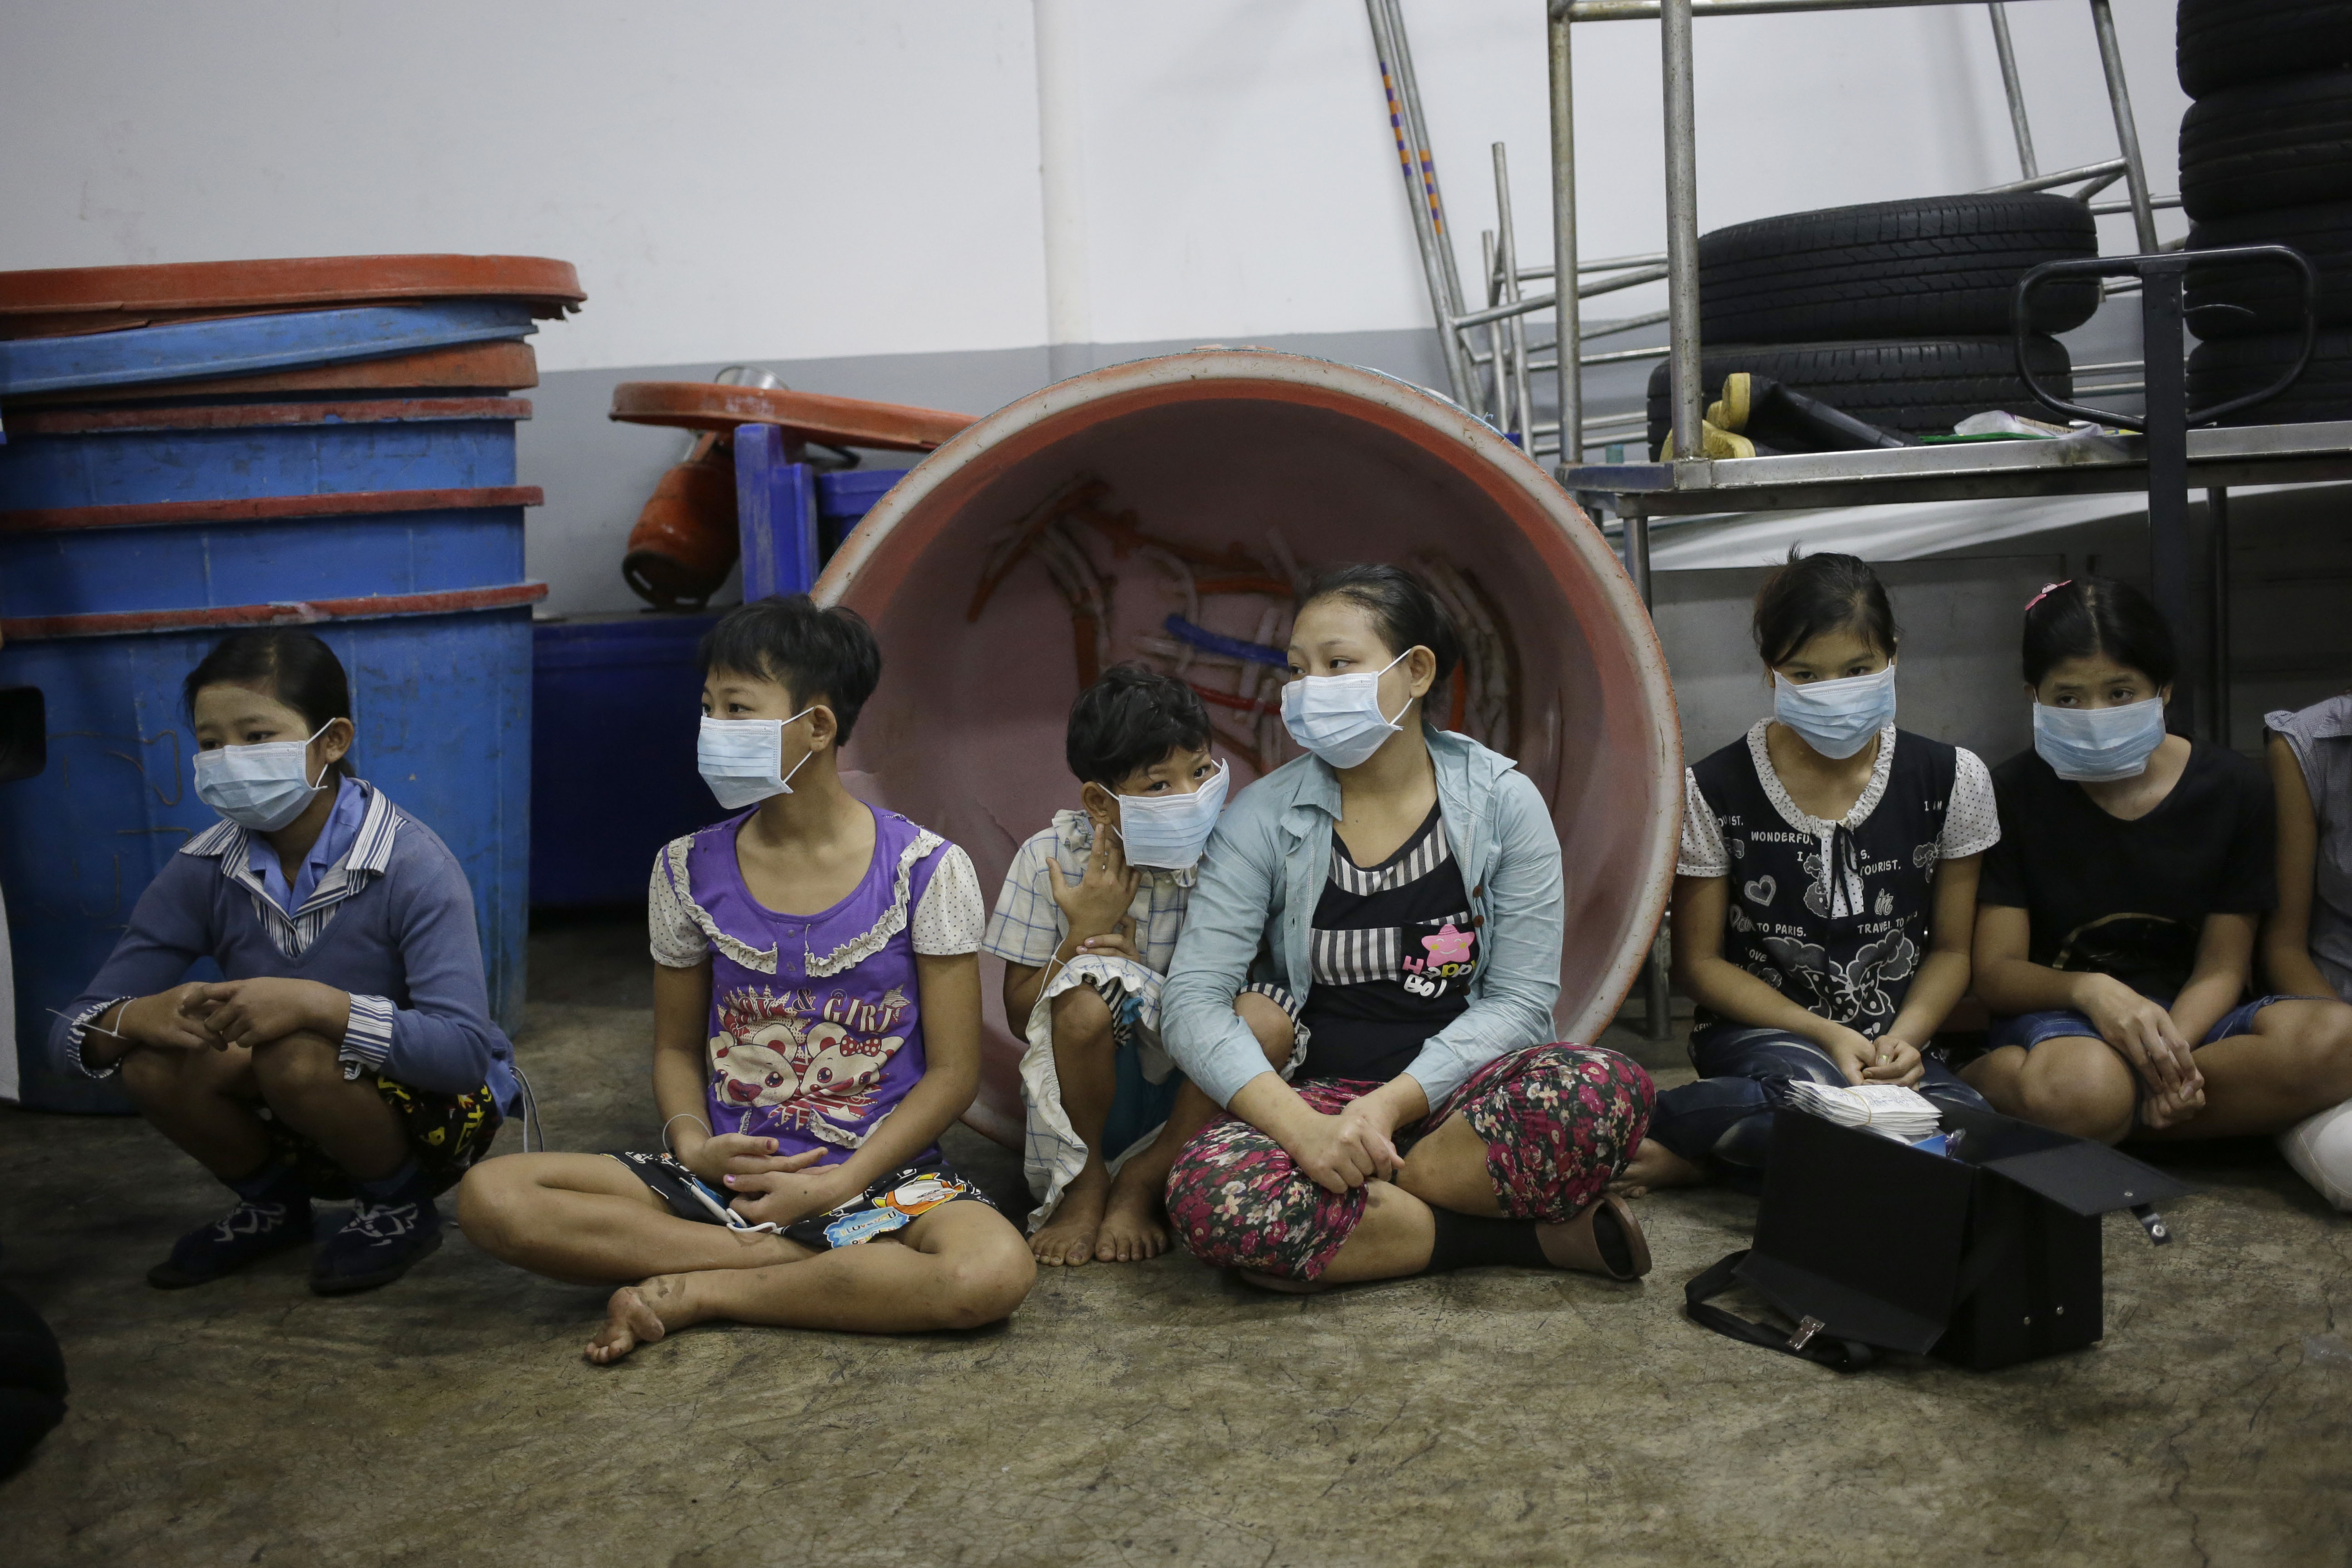 ADVANCE FOR USE MONDAY, DEC. 14, 2015 AT 12:01 A.M. EST (05:01 GMT) AND THEREAFTER - In this Monday, Nov. 9, 2015 photo, children sit together to be registered by officials during a raid on a shrimp shed in Samut Sakhon, Thailand. Abuse is common in Samut Sakhon, which attracts workers from some of the world’s poorest countries, mostly from Myanmar. An International Labor Organization report estimated 10,000 migrant children aged 13 to 15 work in the city. Another U.N. agency study found nearly 60 percent of Burmese laborers toiling in its seafood processing industry were victims of forced labor. (AP Photo/Dita Alangkara)